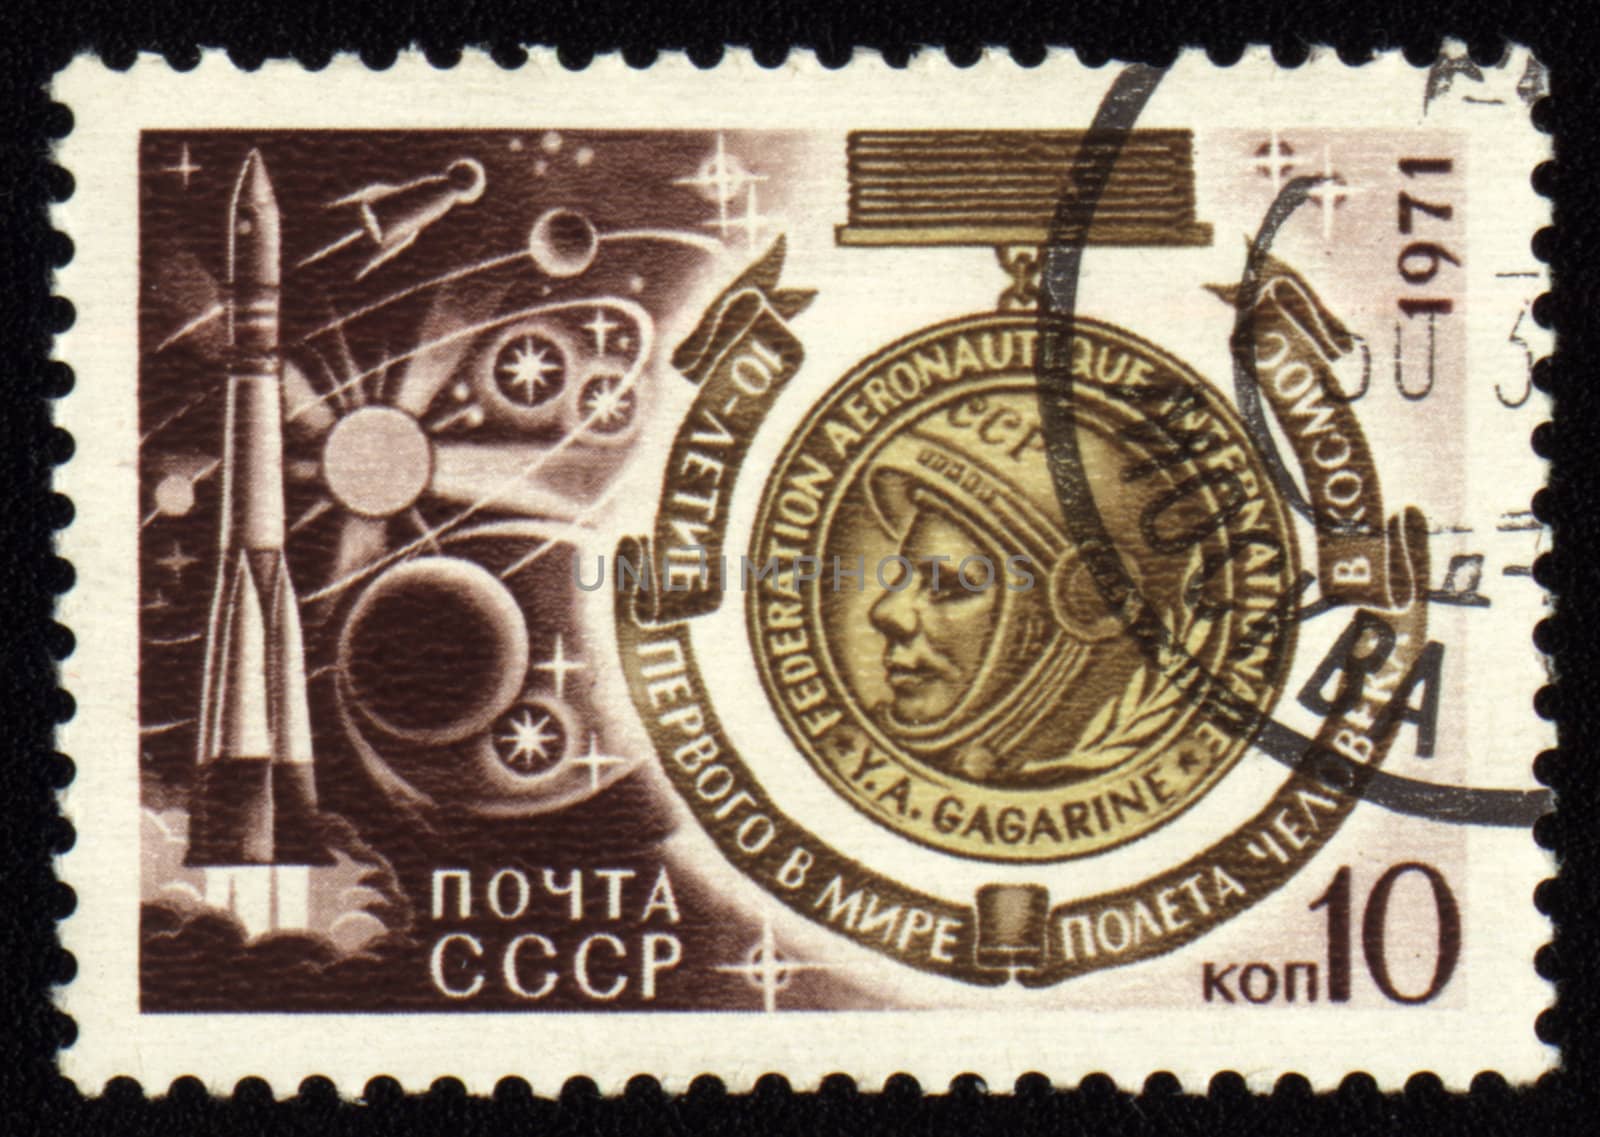 USSR - CIRCA 1971: A stamp printed in USSR shows 10-years anniversary of first Gagarine flight in space, circa 

1971